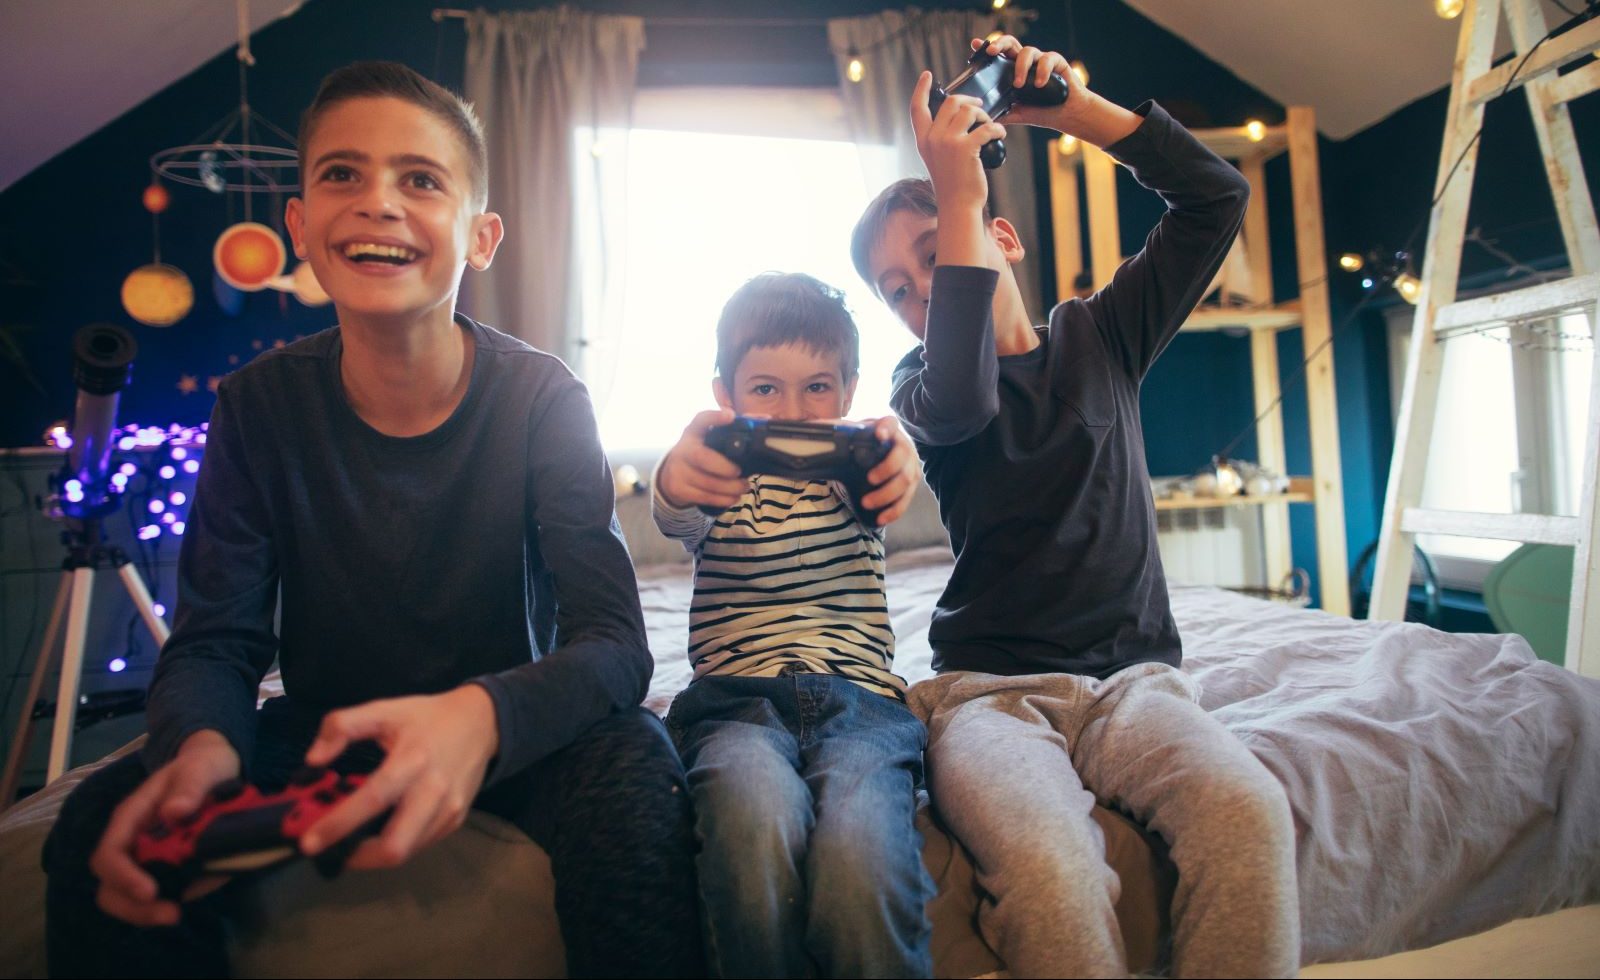 As parents move to limit screen time and gaming, new research suggests that video games might actually "boost" kids' brains.